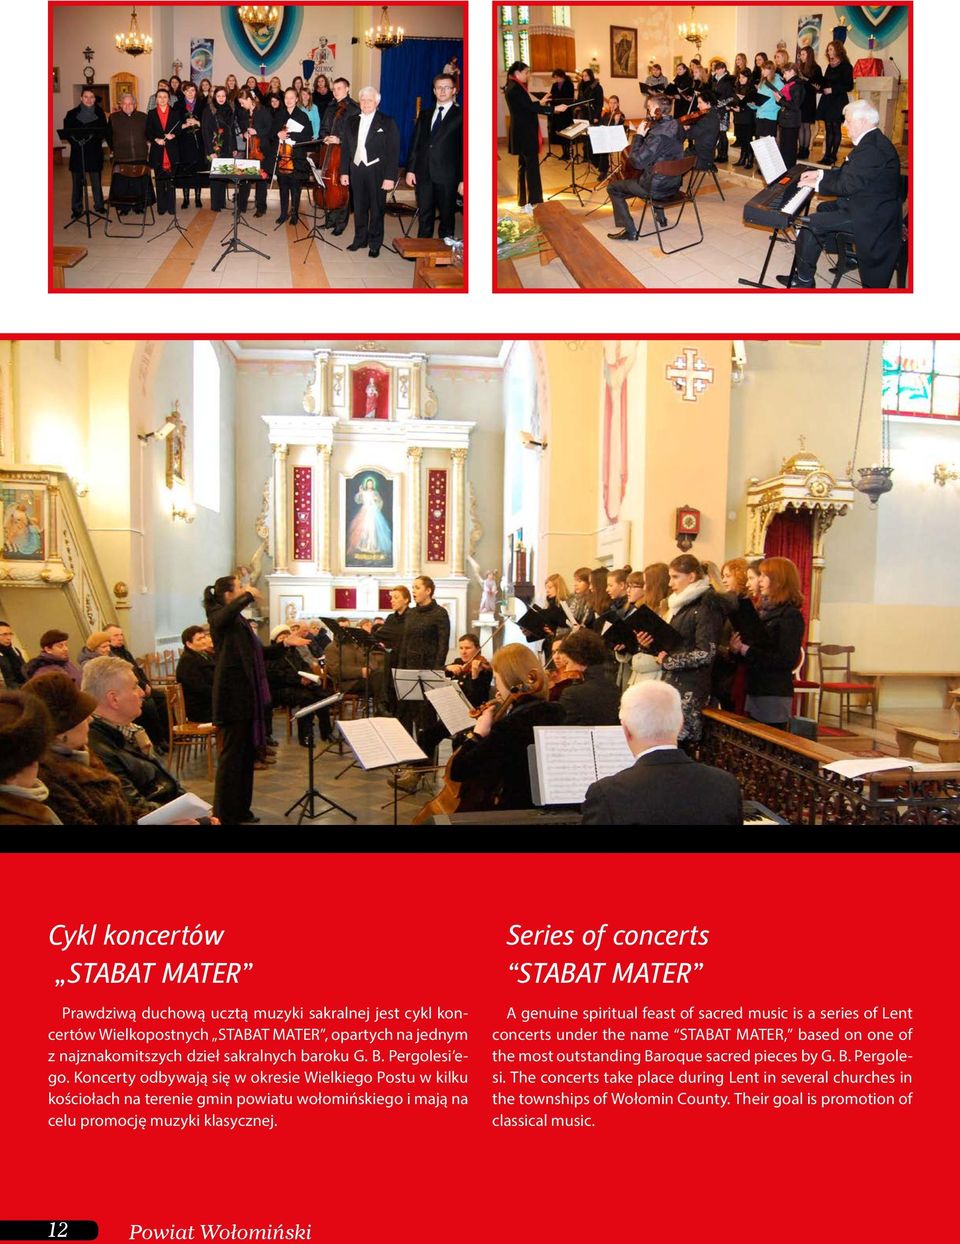 Series of concerts STABAT MATER A genuine spiritual feast of sacred music is a series of Lent concerts under the name STABAT MATER, based on one of the most outstanding Baroque